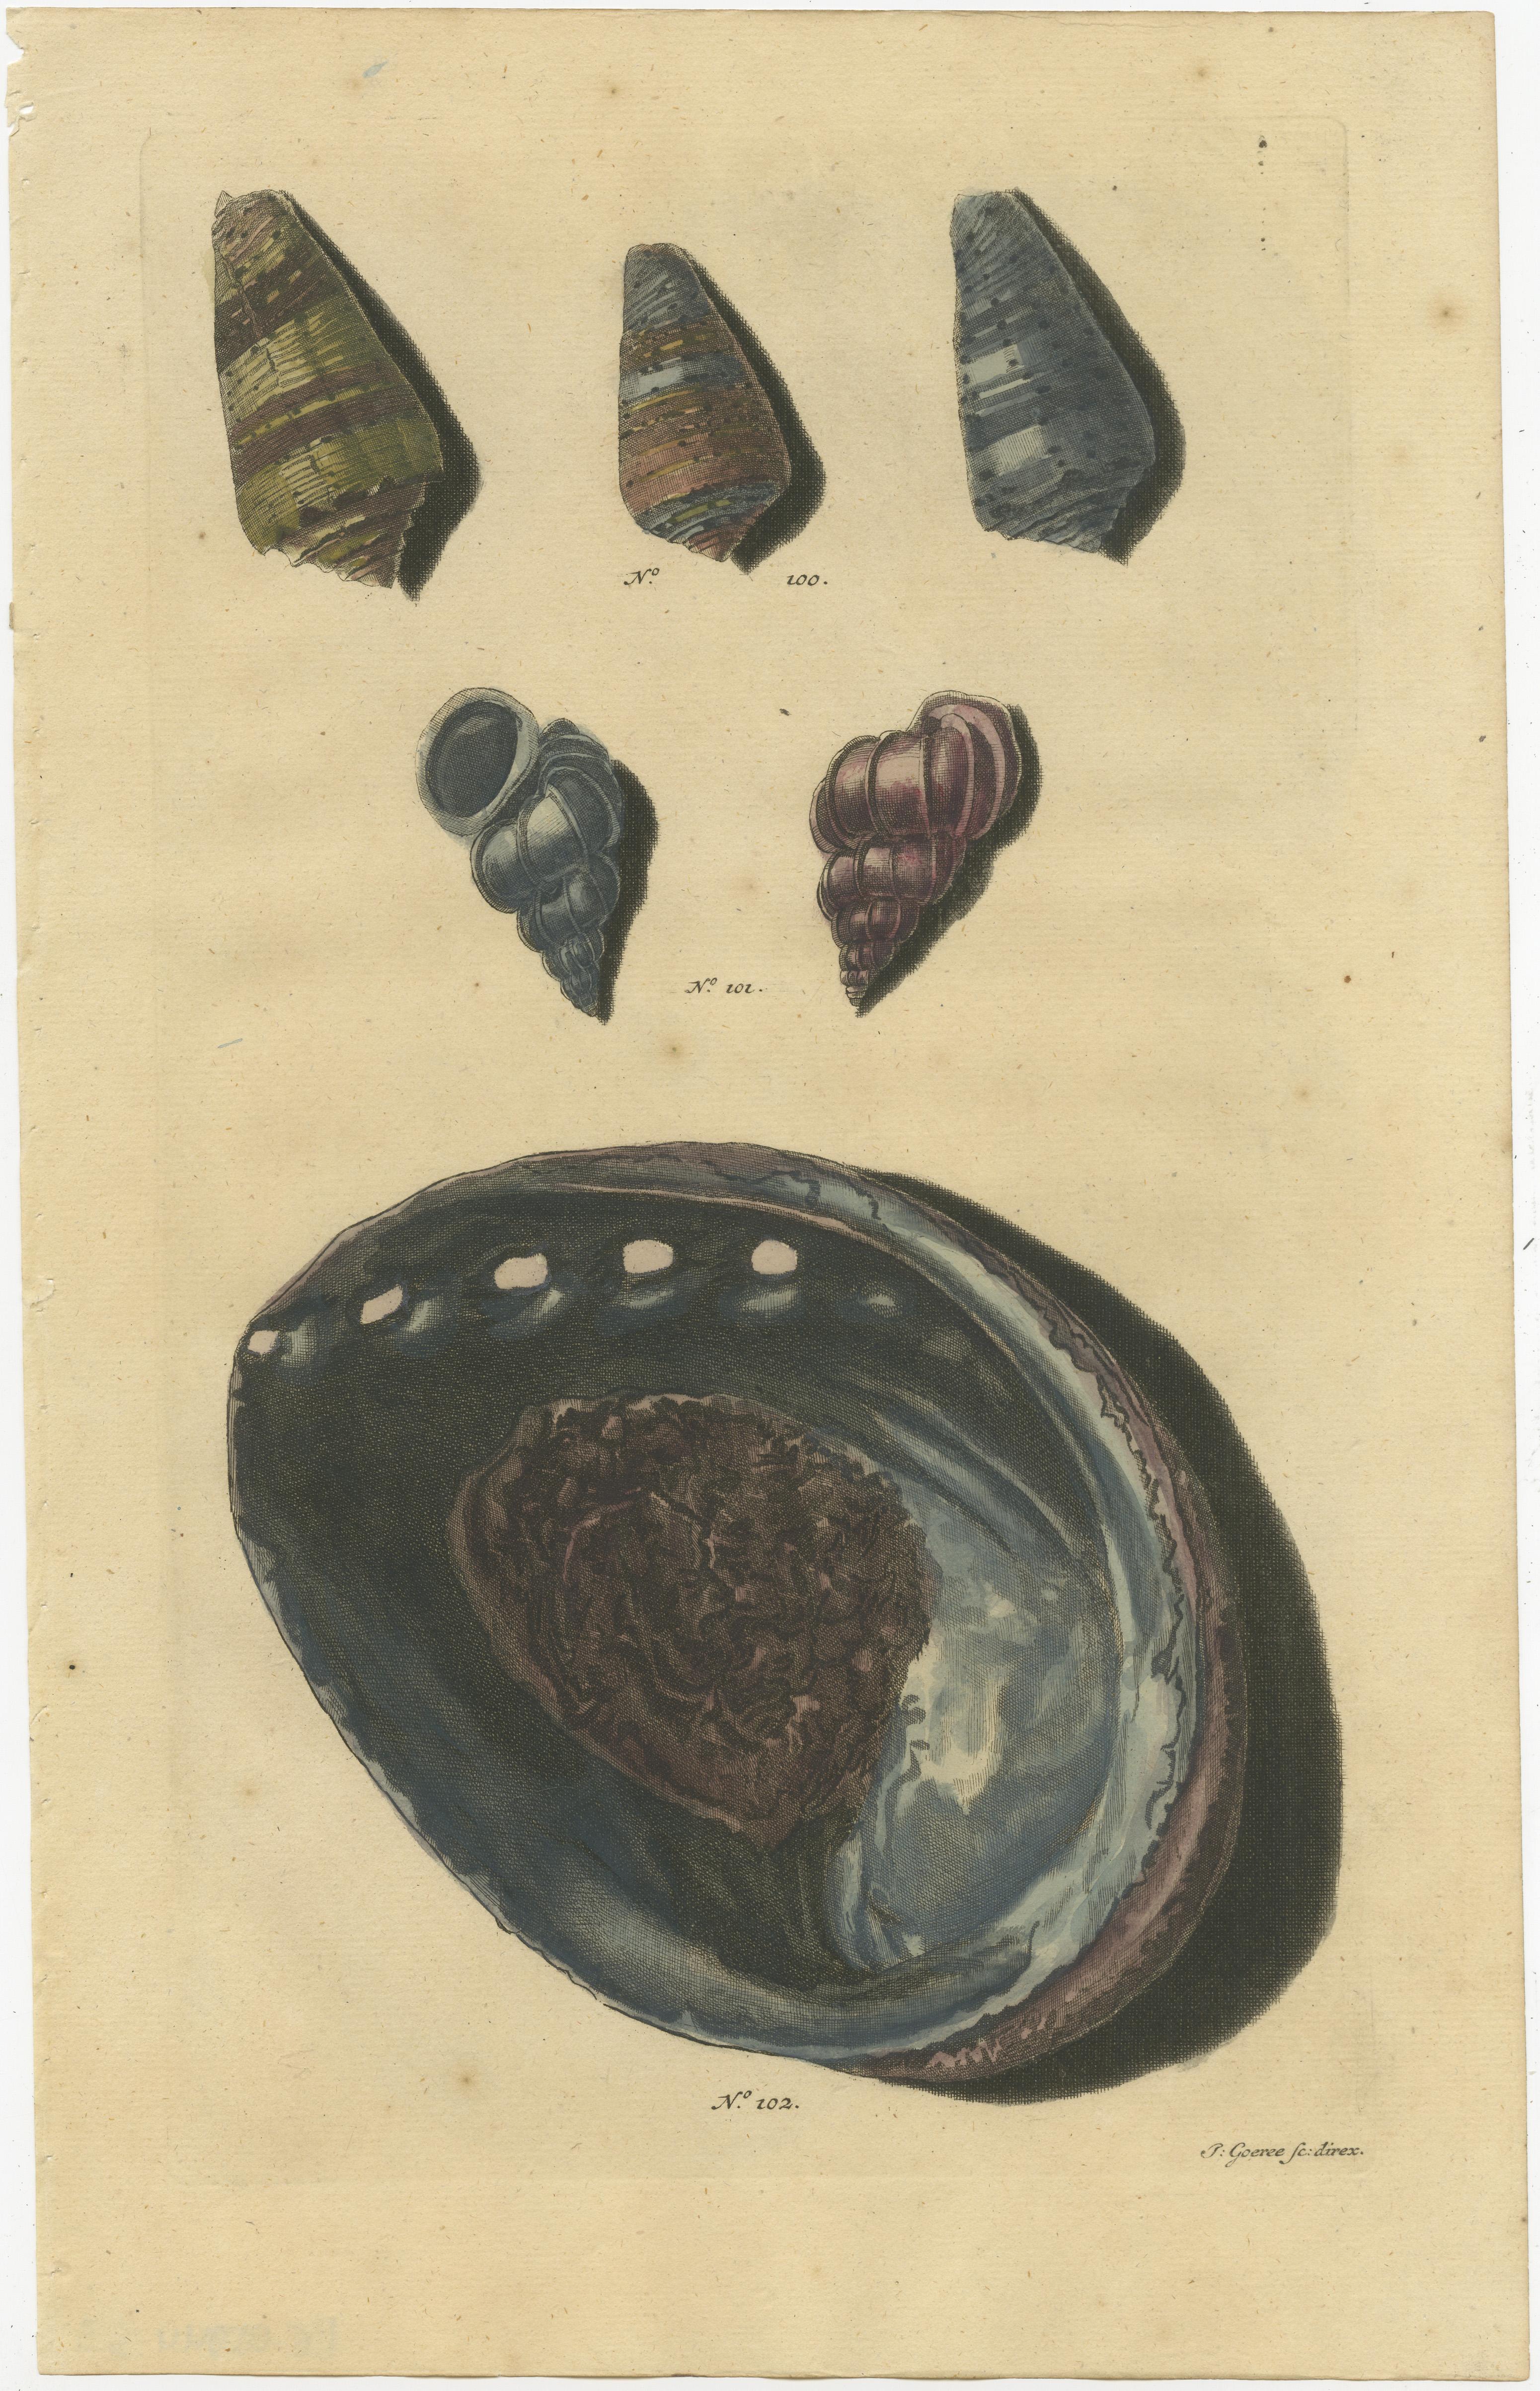 Set of three antique prints of various sea shells and molluscs. These print originate from 'Oud en Nieuw Oost-Indiën' by F. Valentijn.

François Valentyn or Valentijn (17 April 1666 – 6 August 1727) was a Dutch Calvinist minister, naturalist and